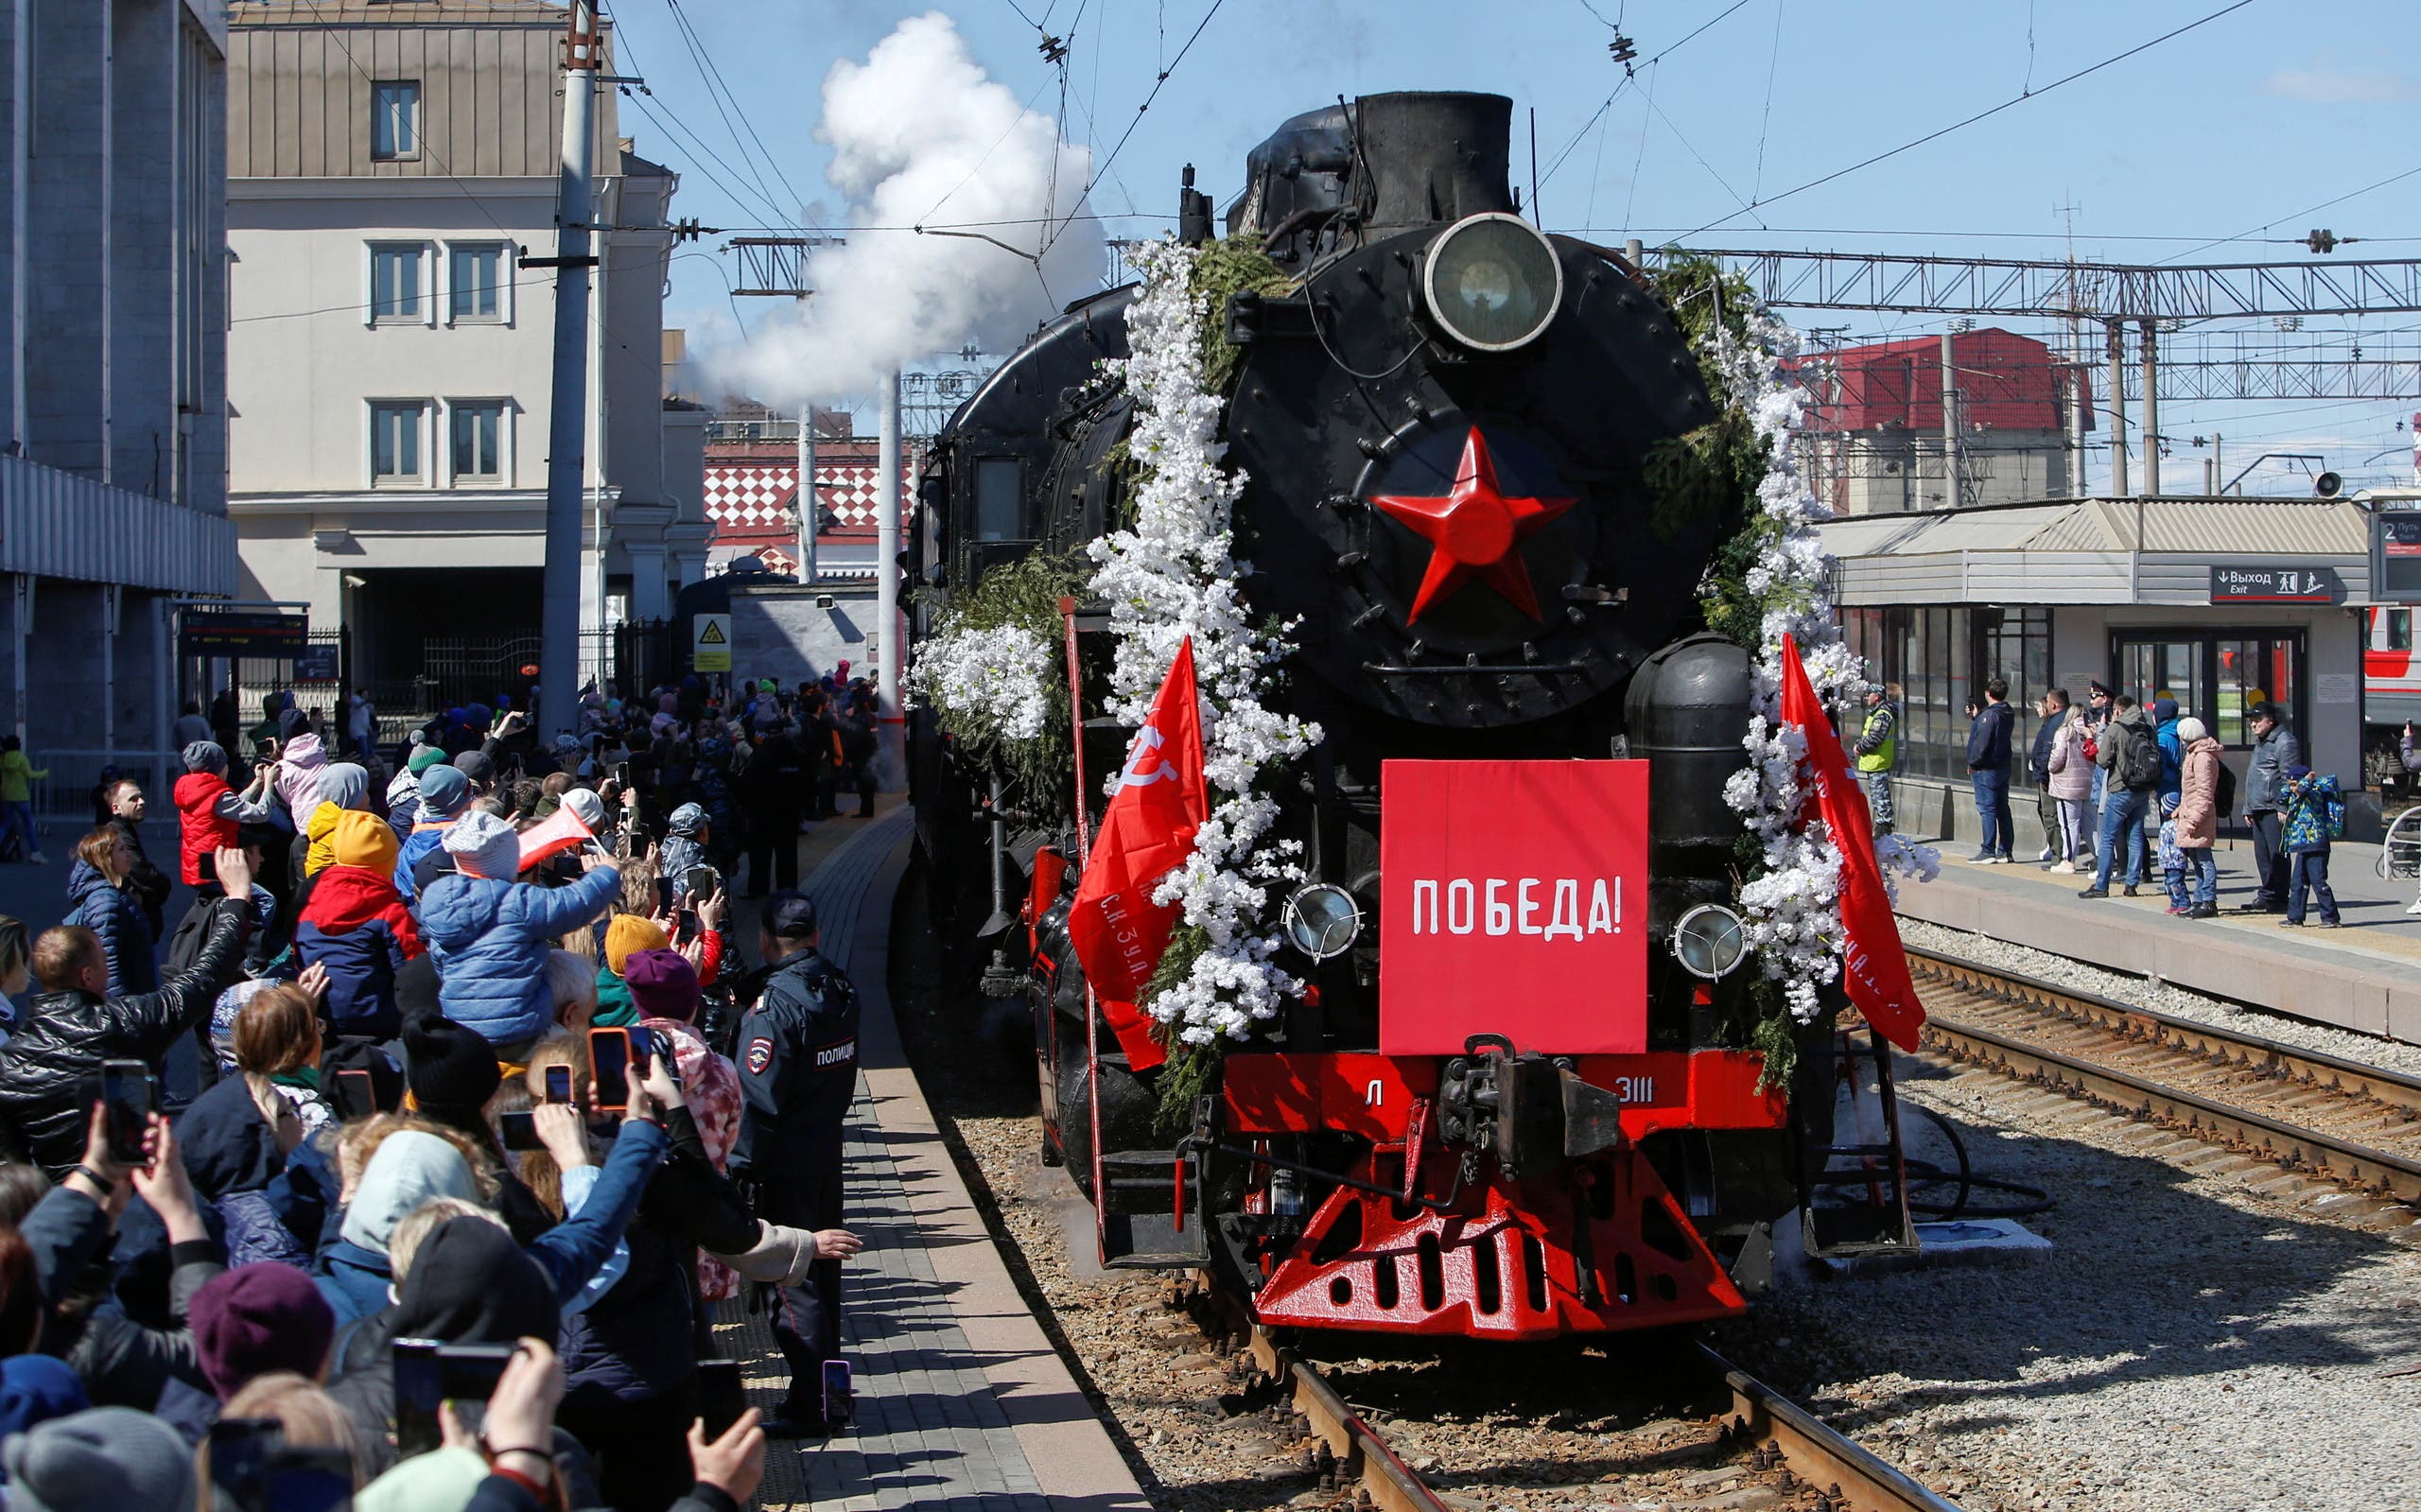 A Soviet-era train arrives at a railway station ahead of Victory Day, which marks the anniversary of the victory over Nazi Germany in World War Two, in Yekaterinburg, Russia May 7, 2022. A sign on a train reads: Victory. (Reuters)